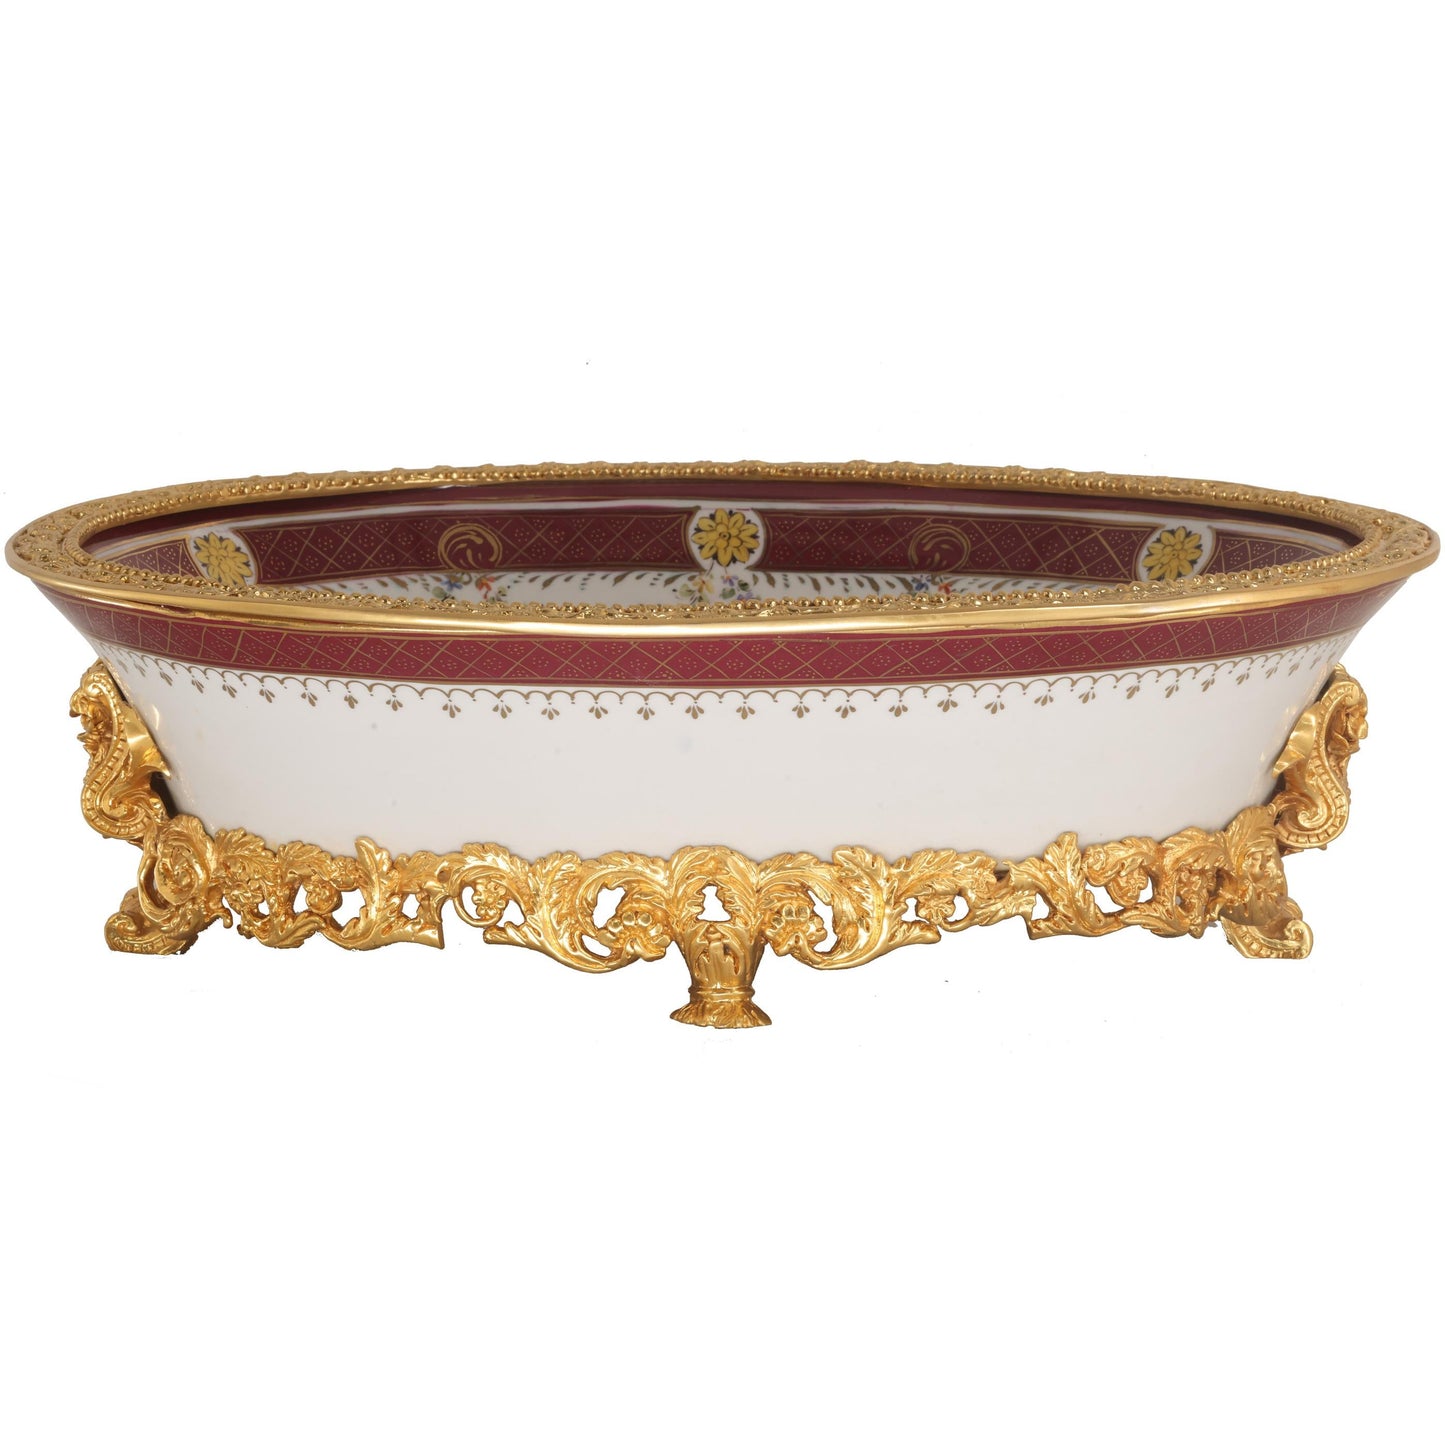 Hand-painted Rococo Porcelain and Bronze Serving Dish